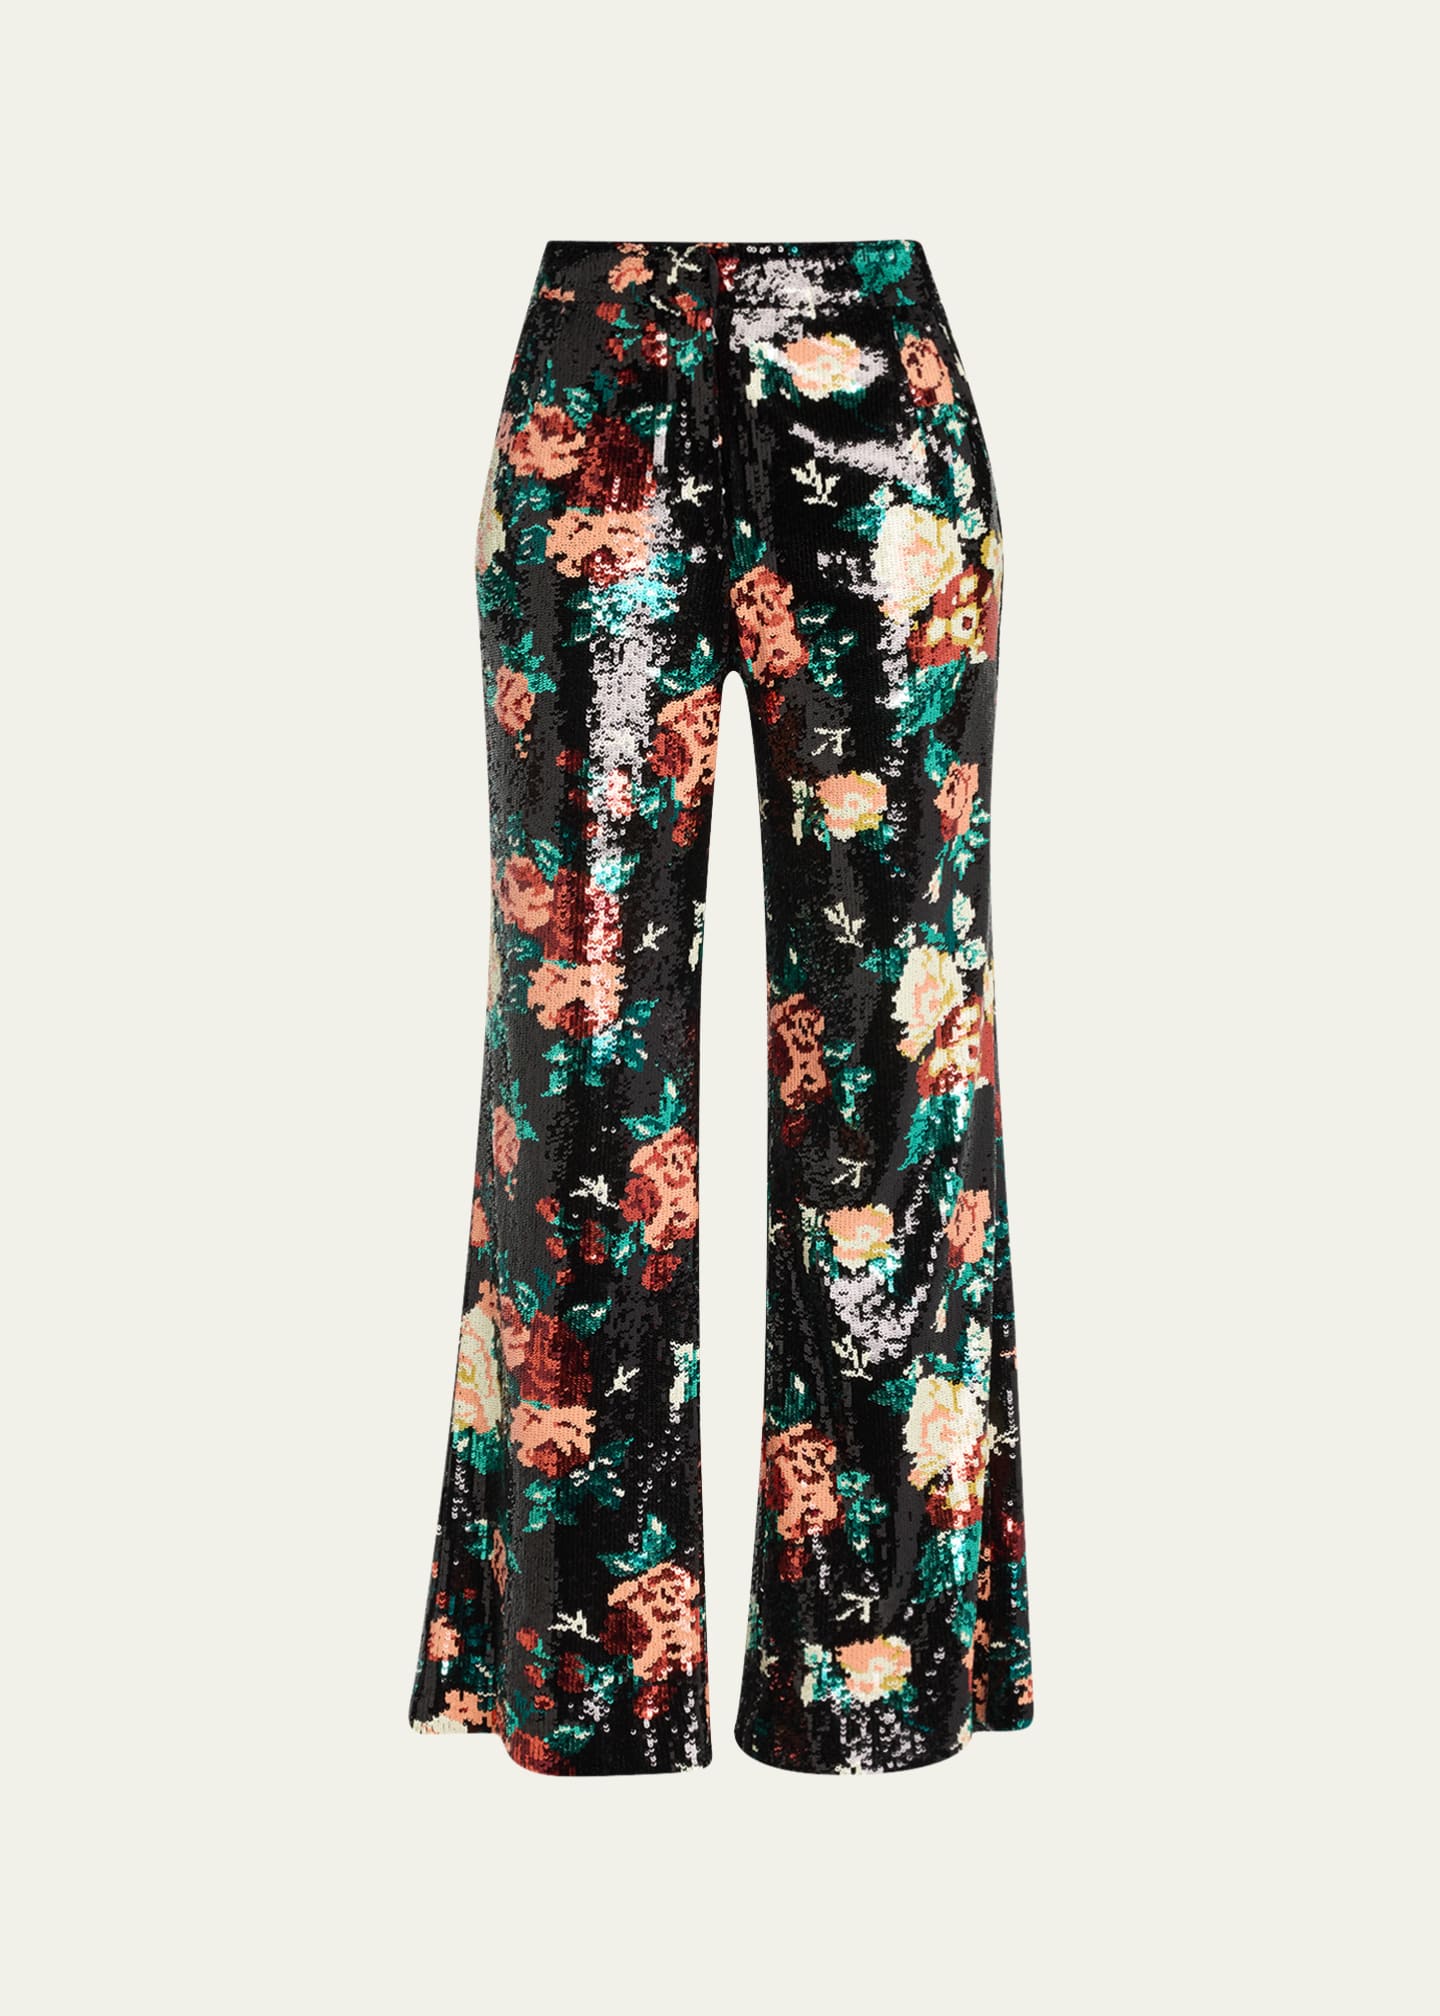 SANDRO Floral Print Lightweight Pants, SIZE 1, SMALL – SecondFirst